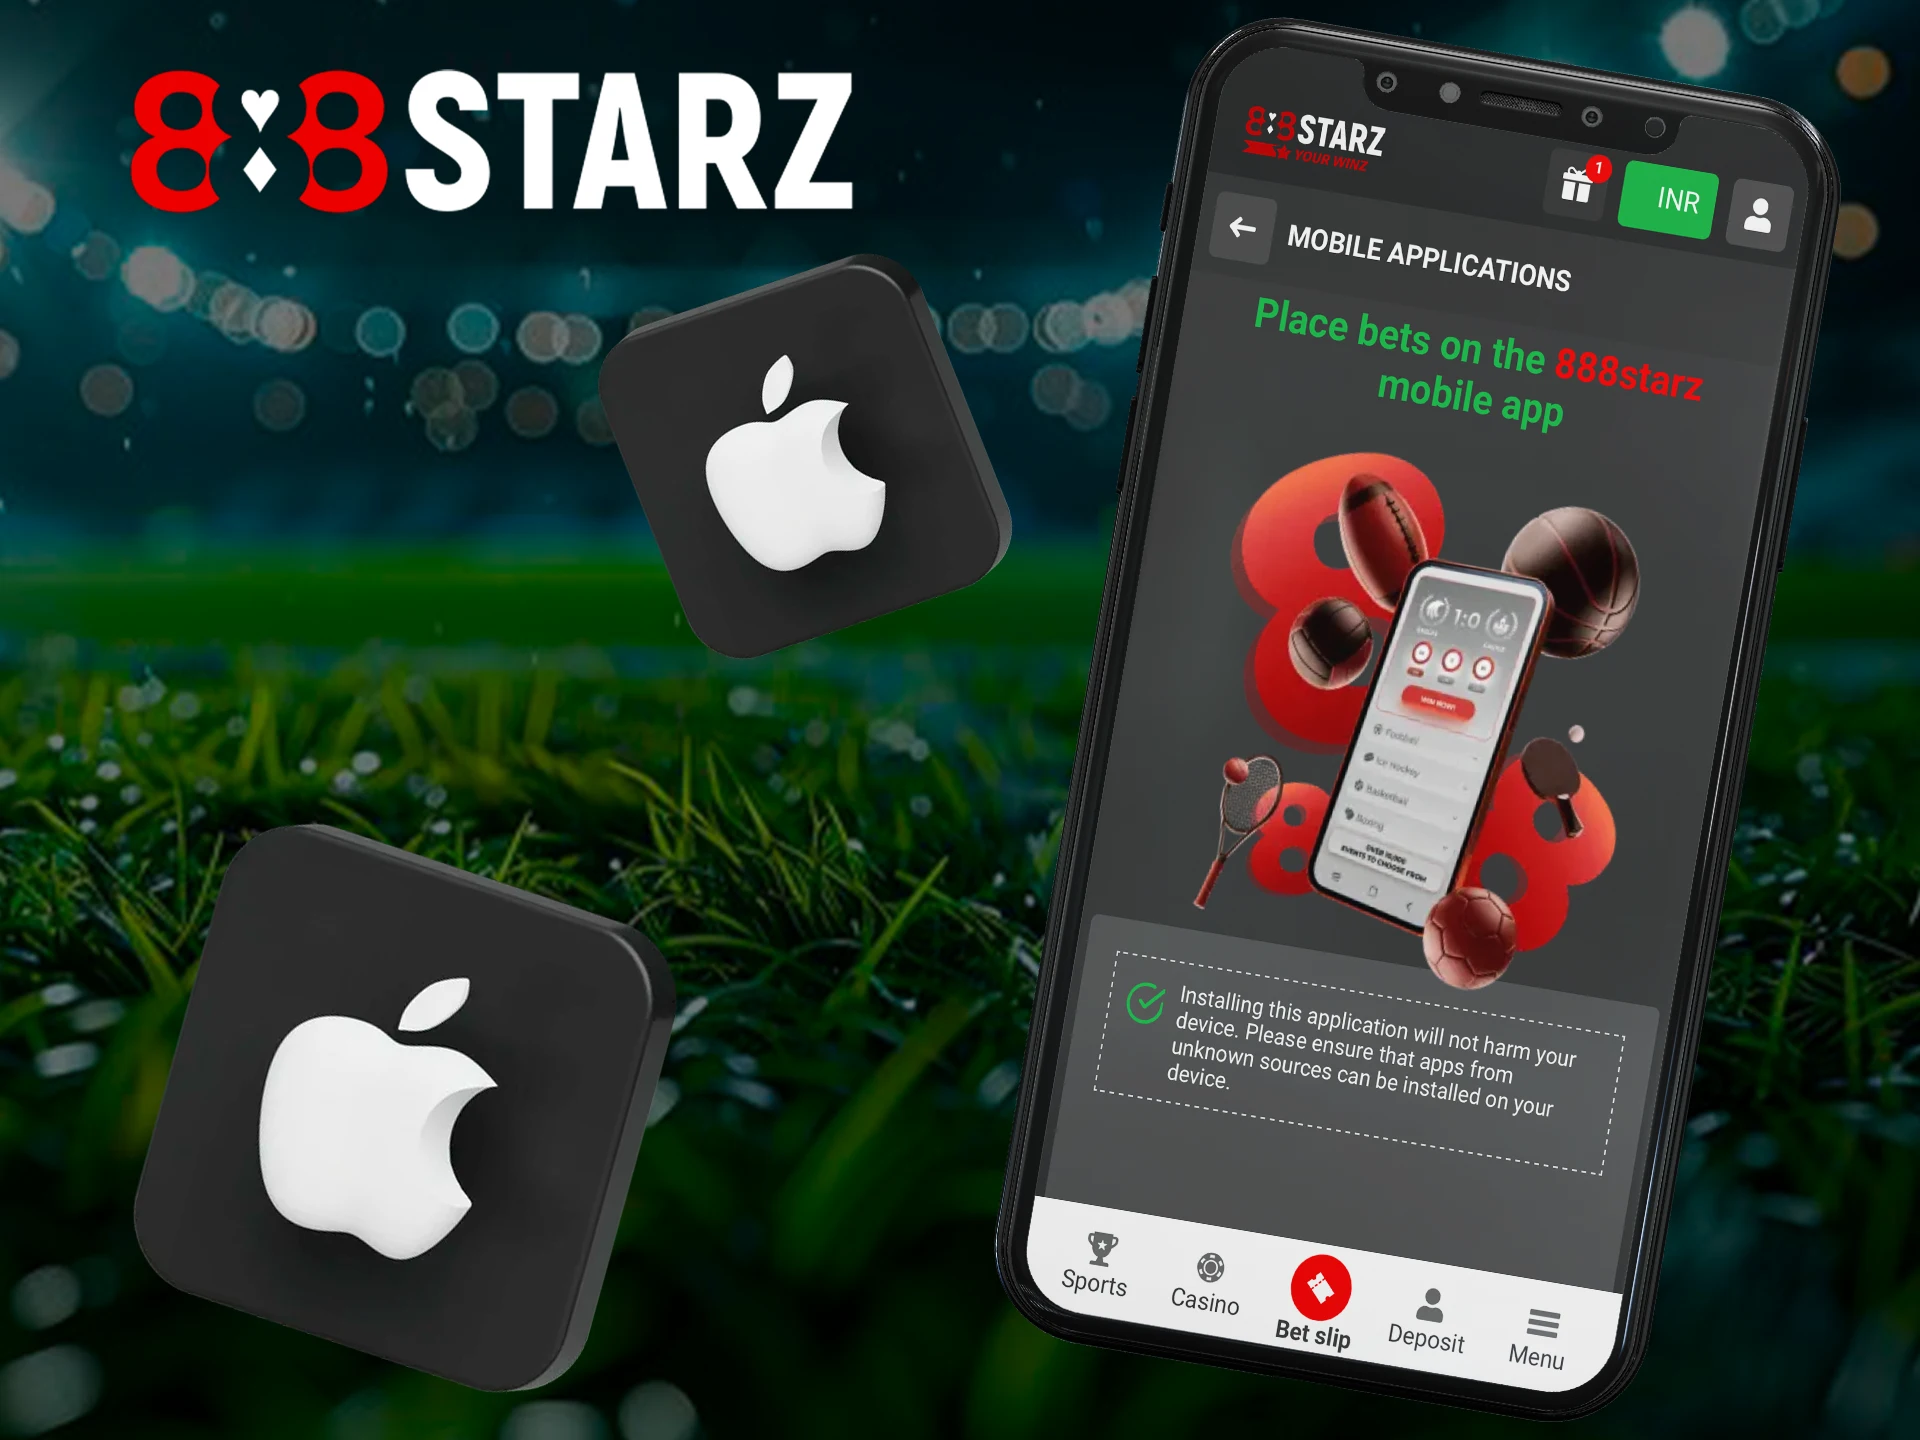 888Starz app is also available for iOS users, follow the instructions to download and install the application on your device and place bets live.